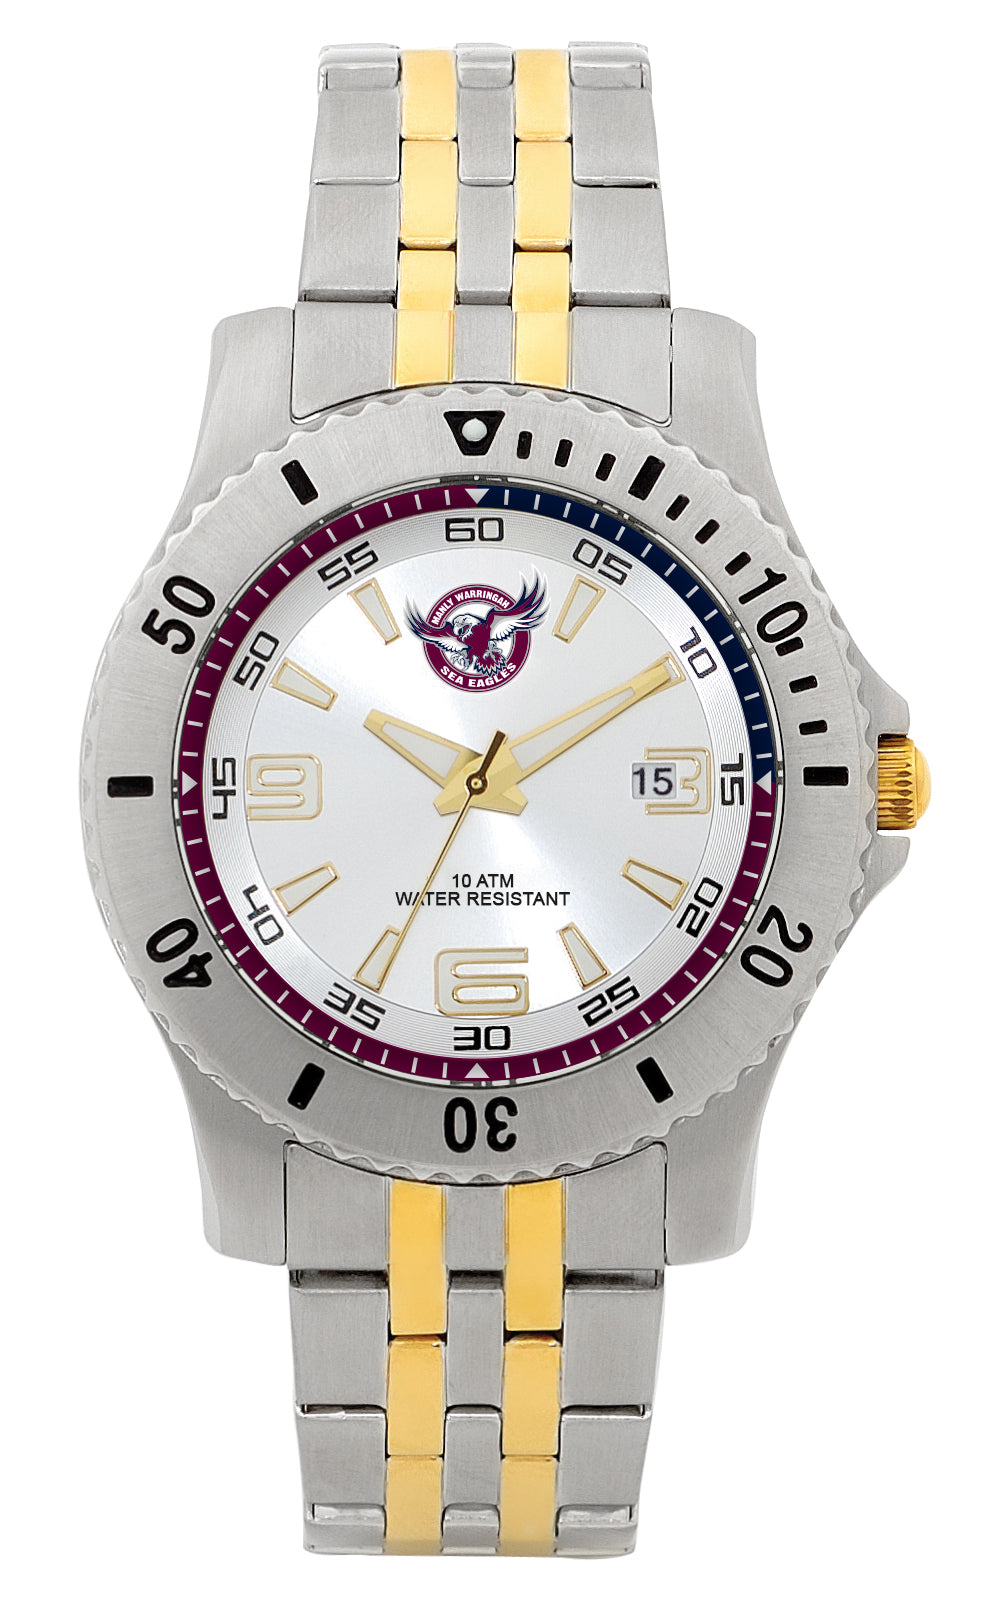 Manly-Warringah Sea Eagles Legends Series Watch